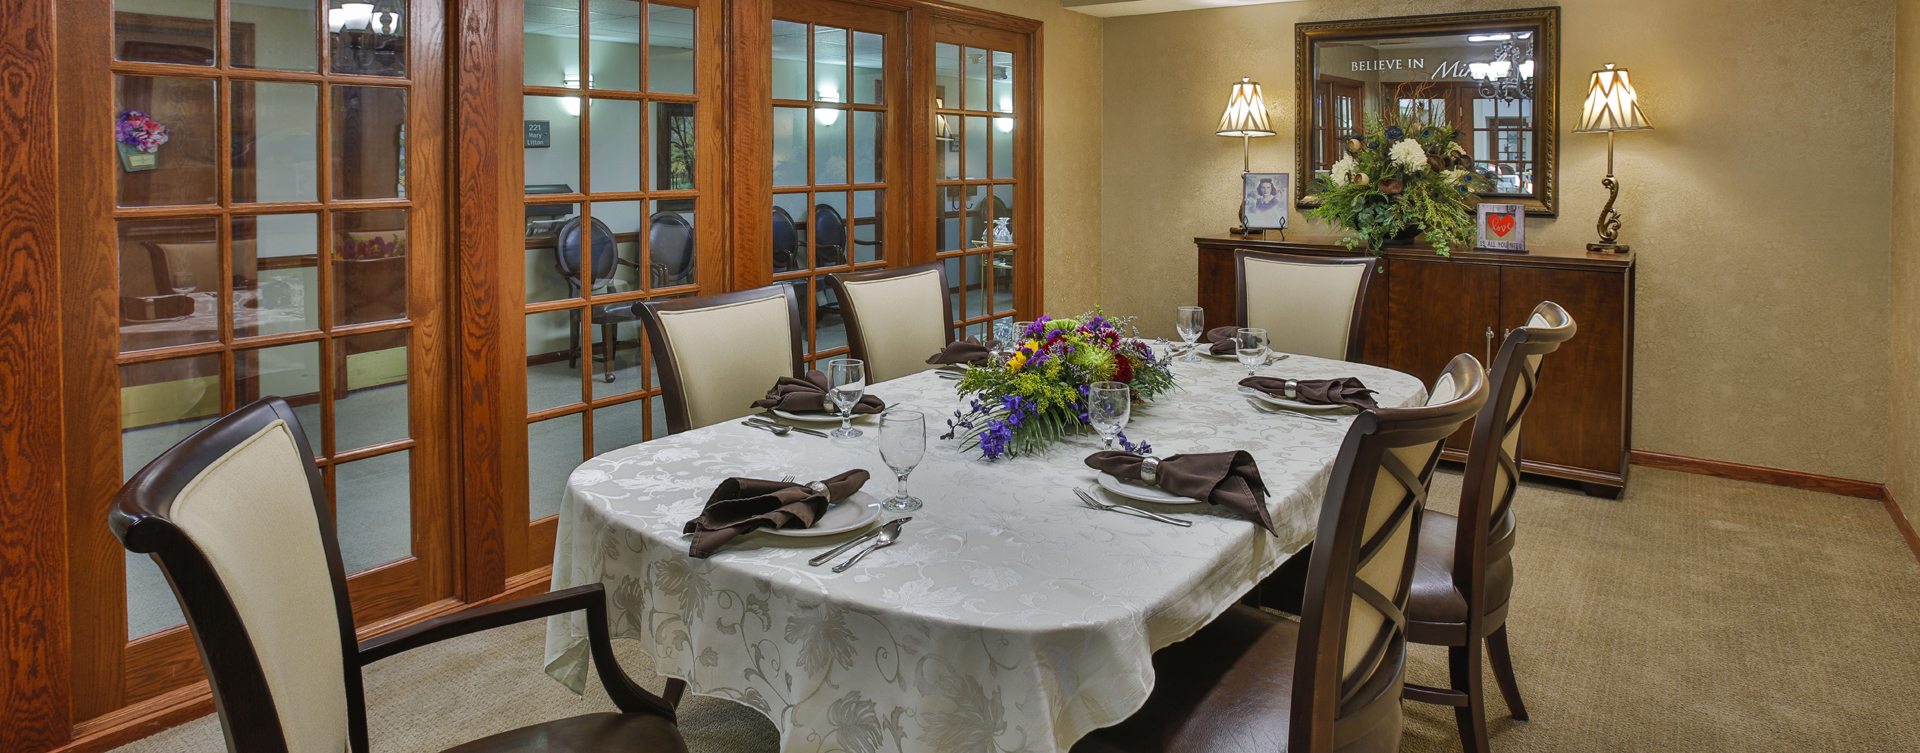 Food is best when shared with family and friends in the private dining room at Bickford of Peoria